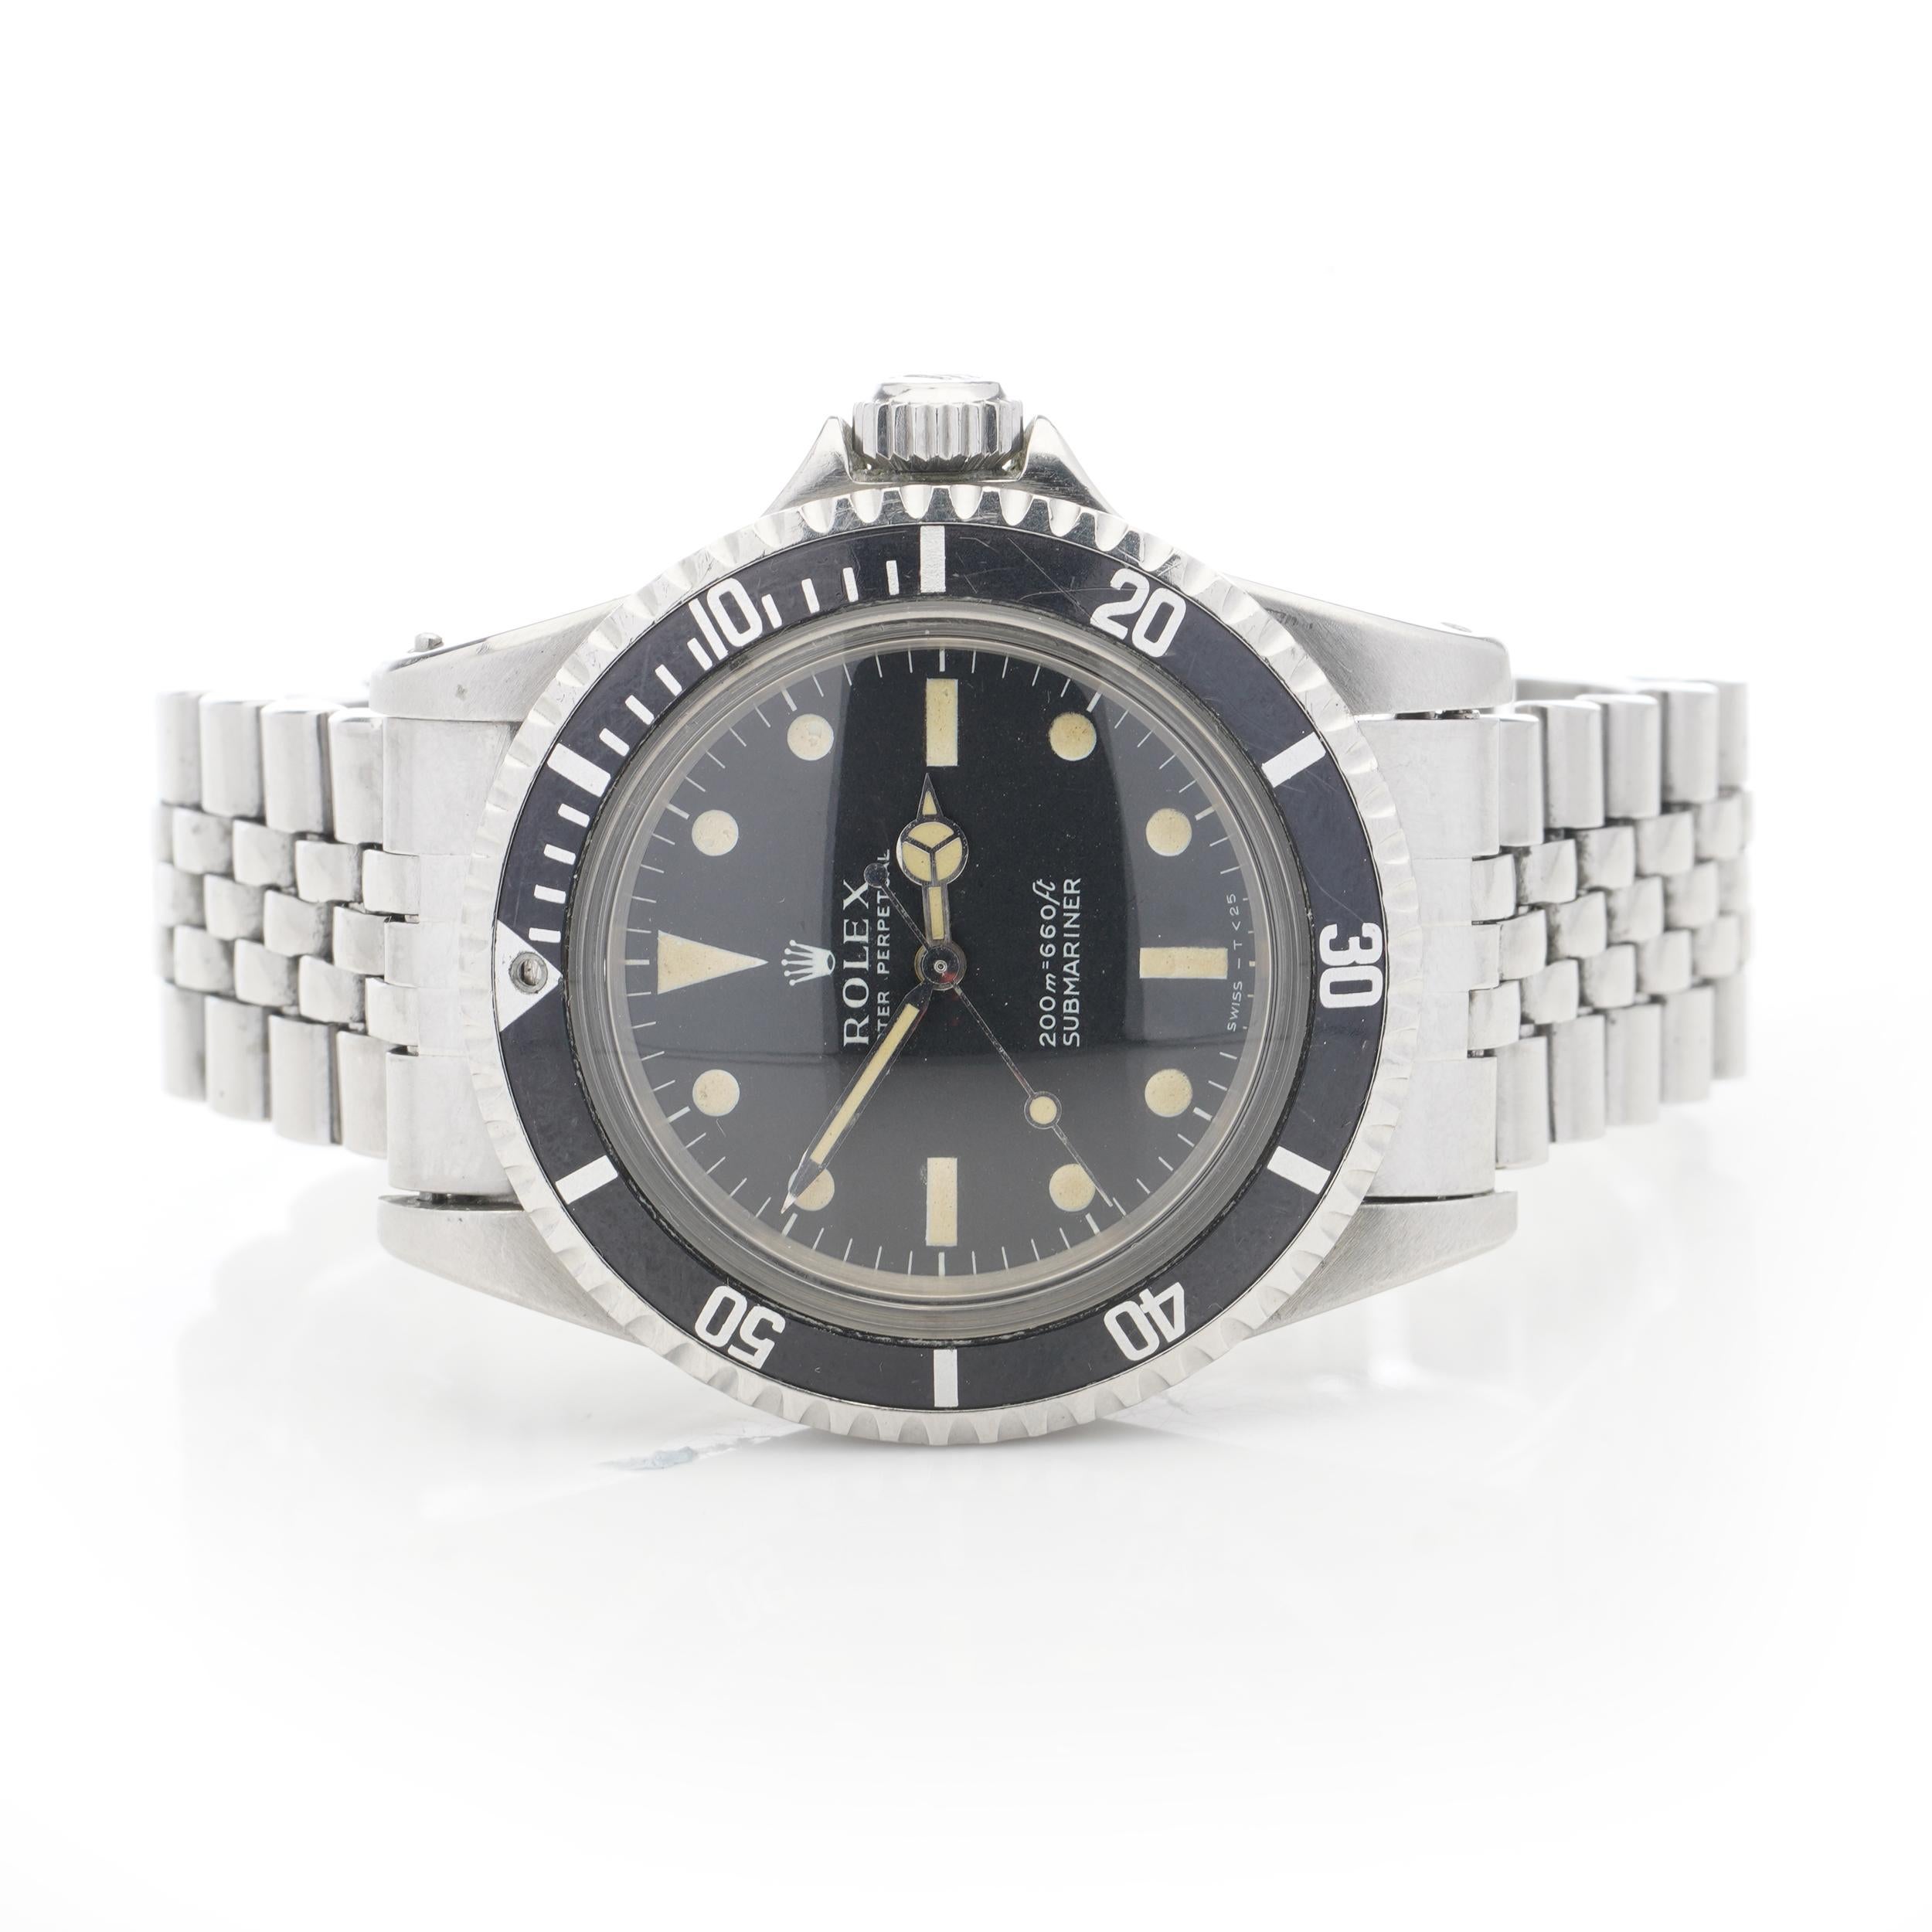 Rolex Oyster Perpetual Submariner, 5513, Stainless Steel Watch For Sale 6